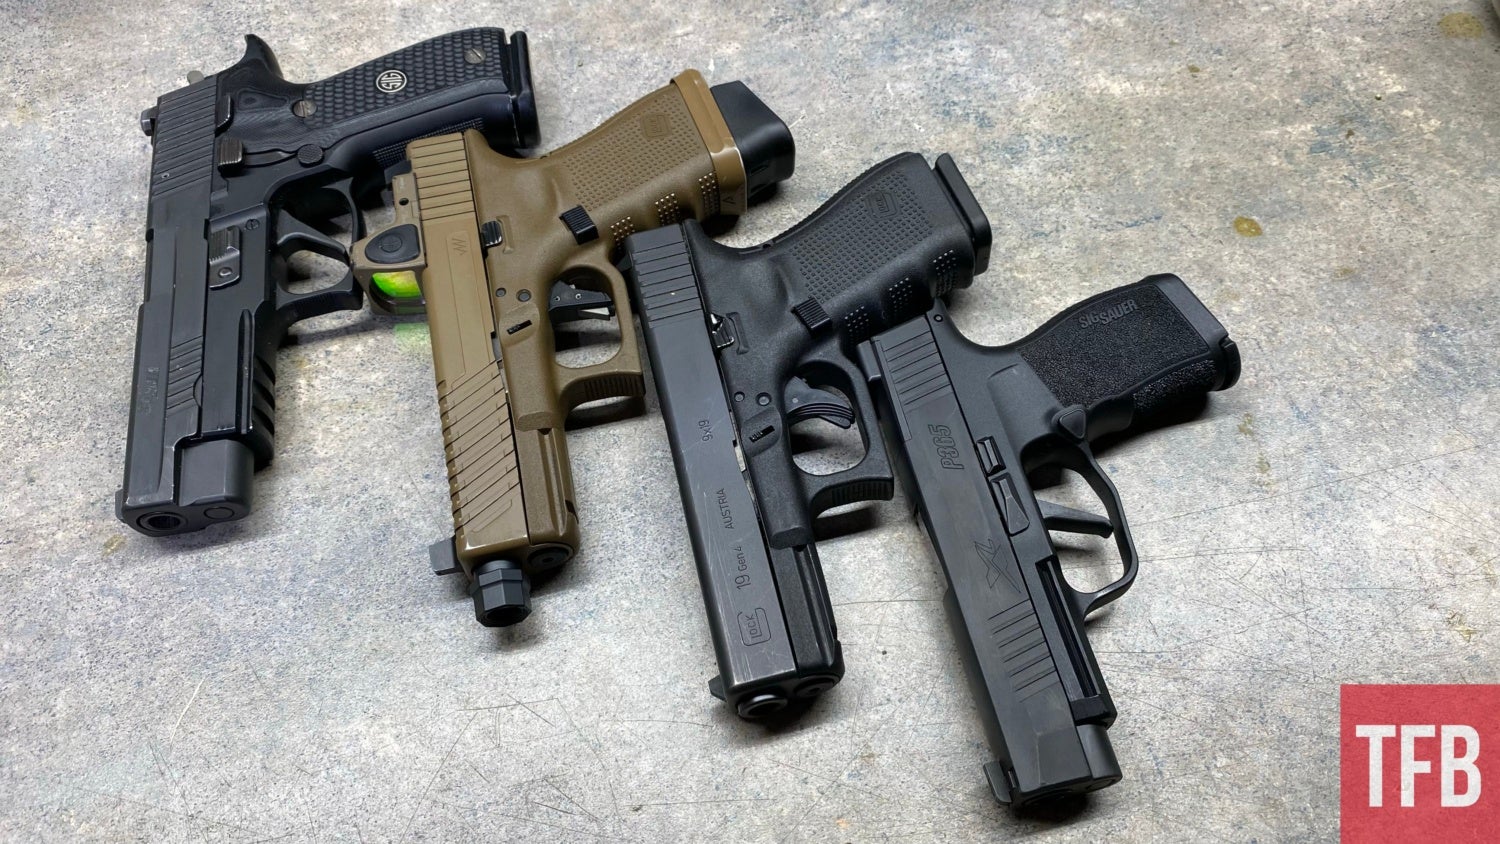 Concealed Carry Corner: My Most Used Carry Guns